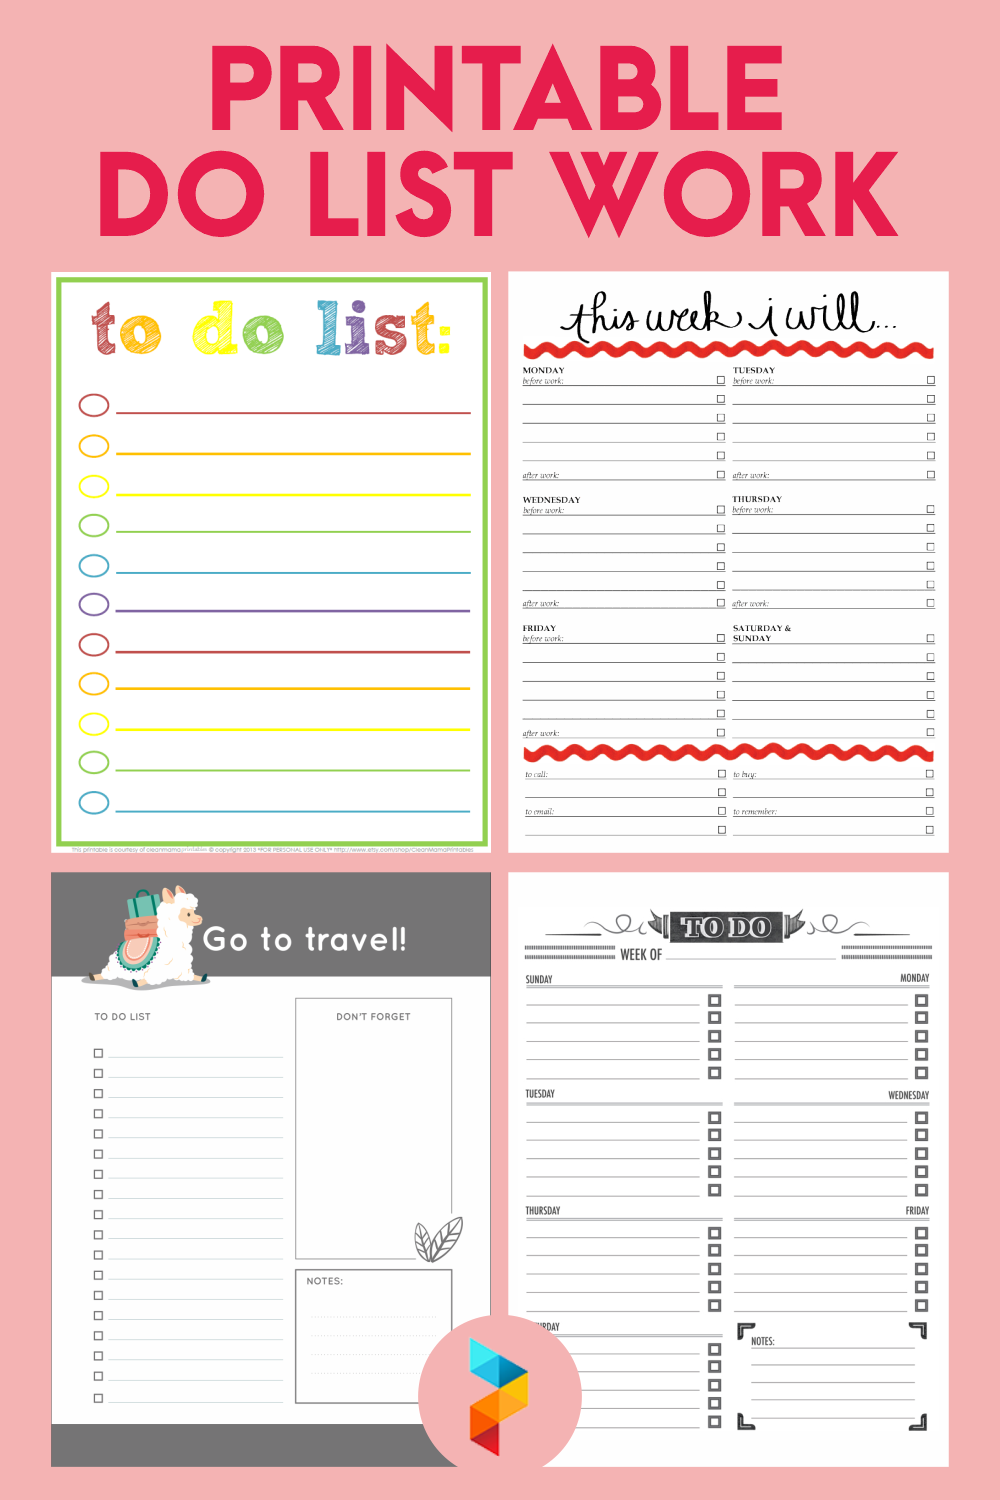 Printable Daily To Do List For Work